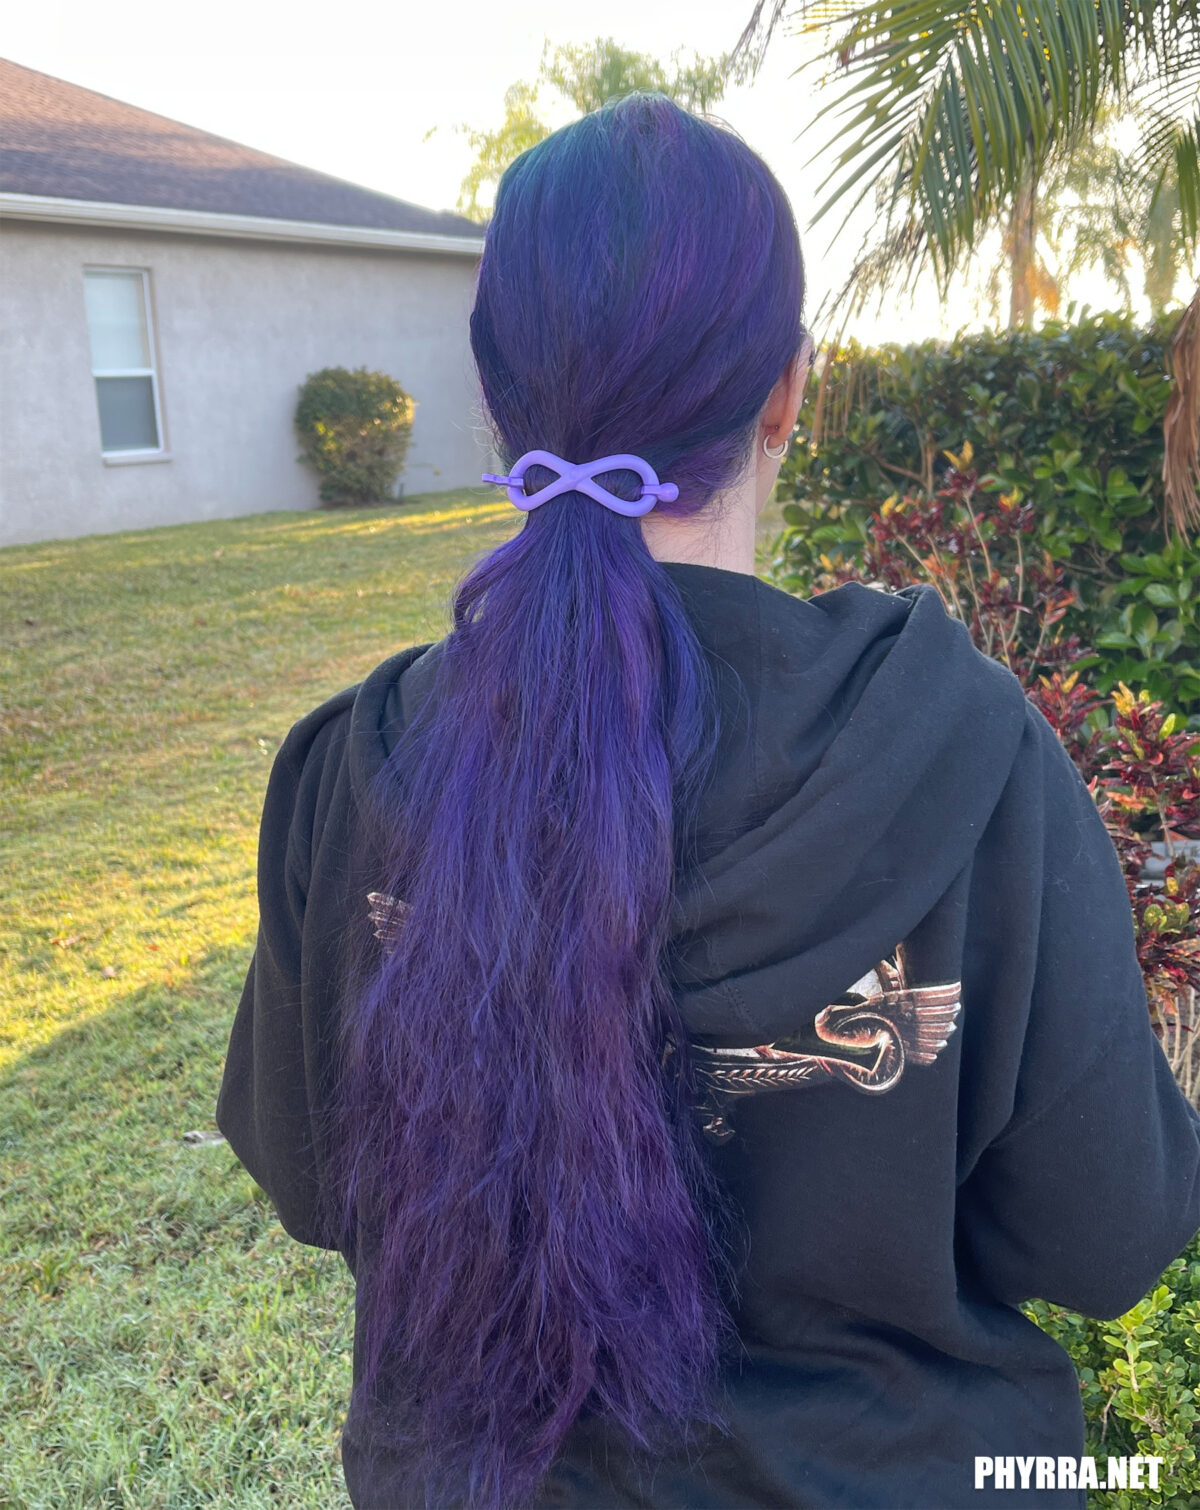 My long hair bound by a single purple clip